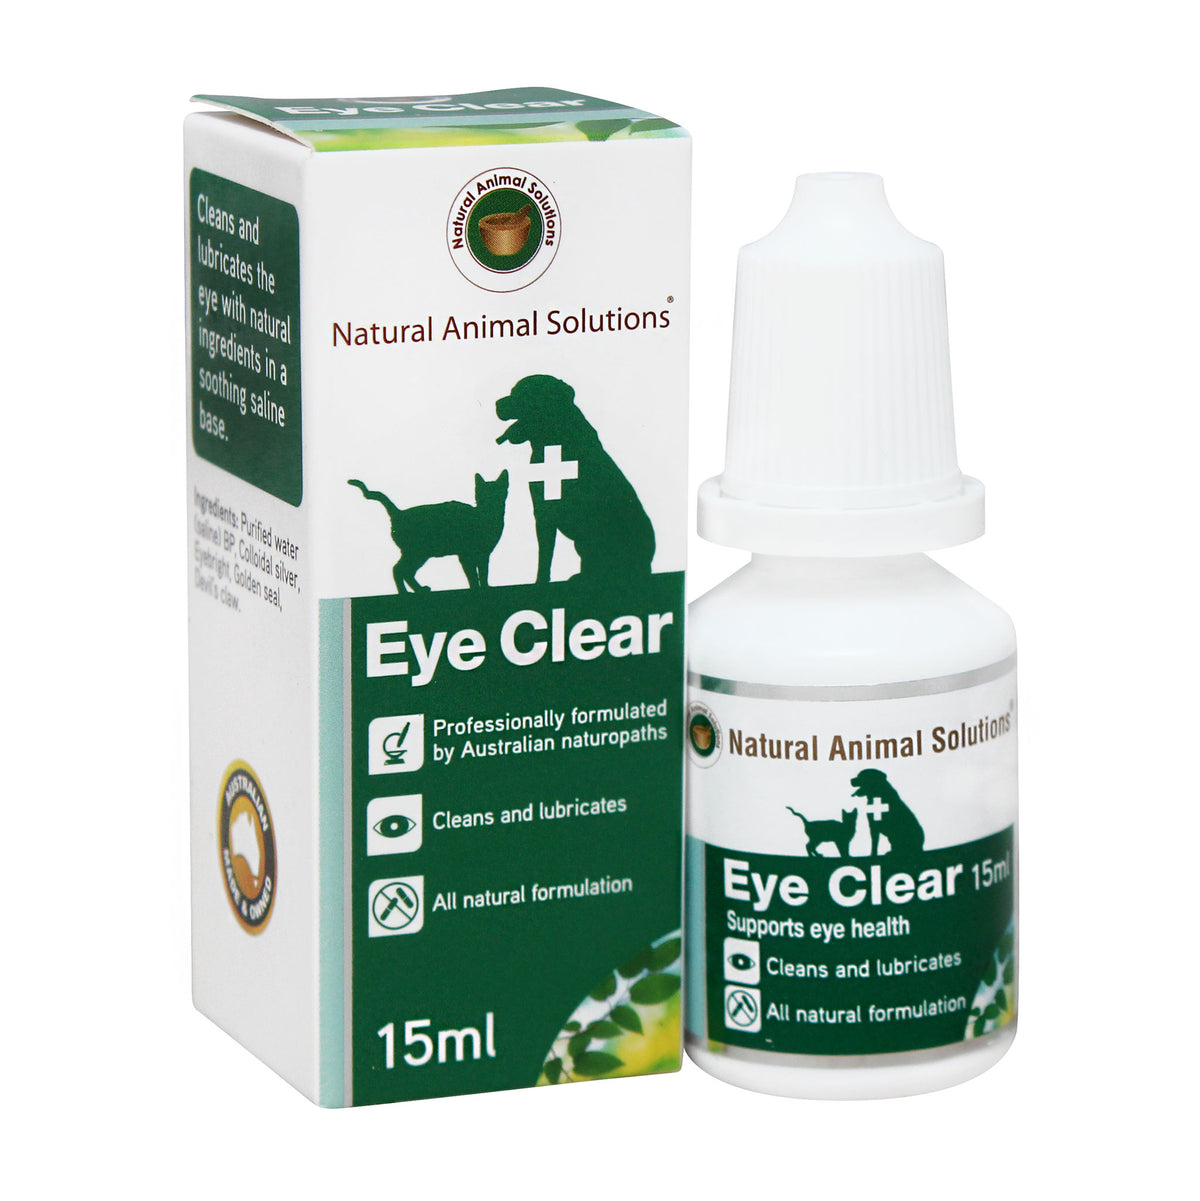 Natural Animal Solutions Eye Clear Eye Cleaning Solution 15mL